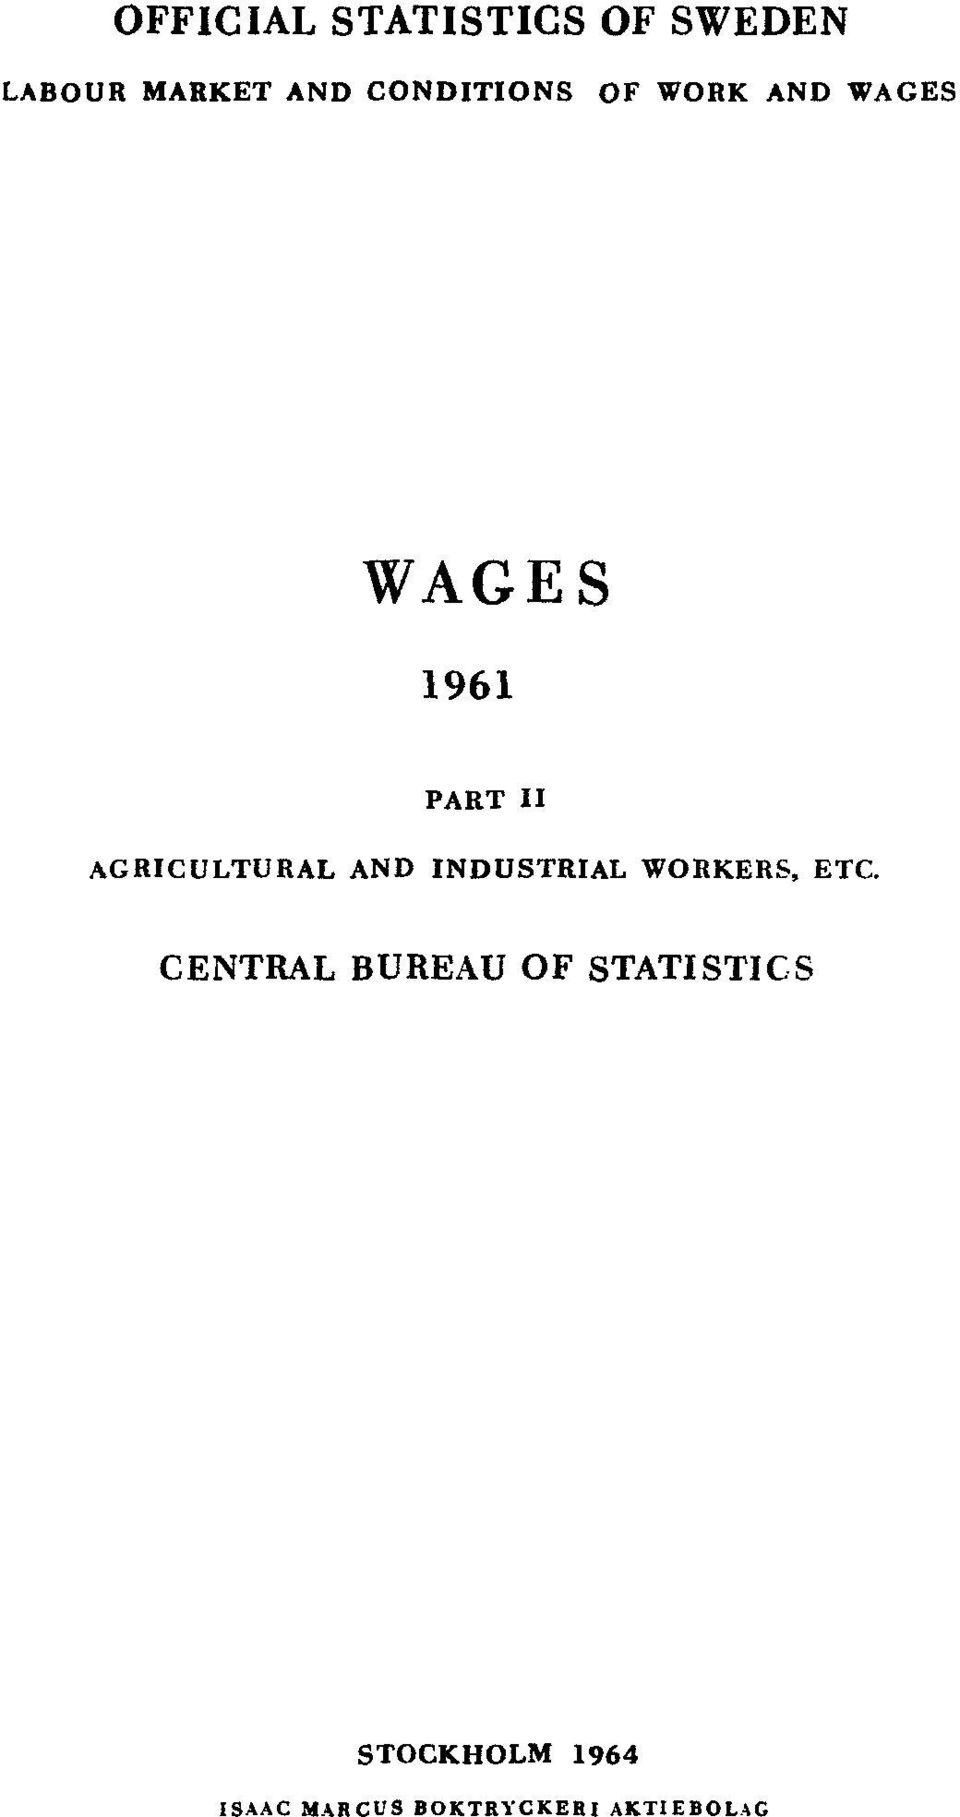 AGRICULTURAL AND INDUSTRIAL WORKERS, ETC.